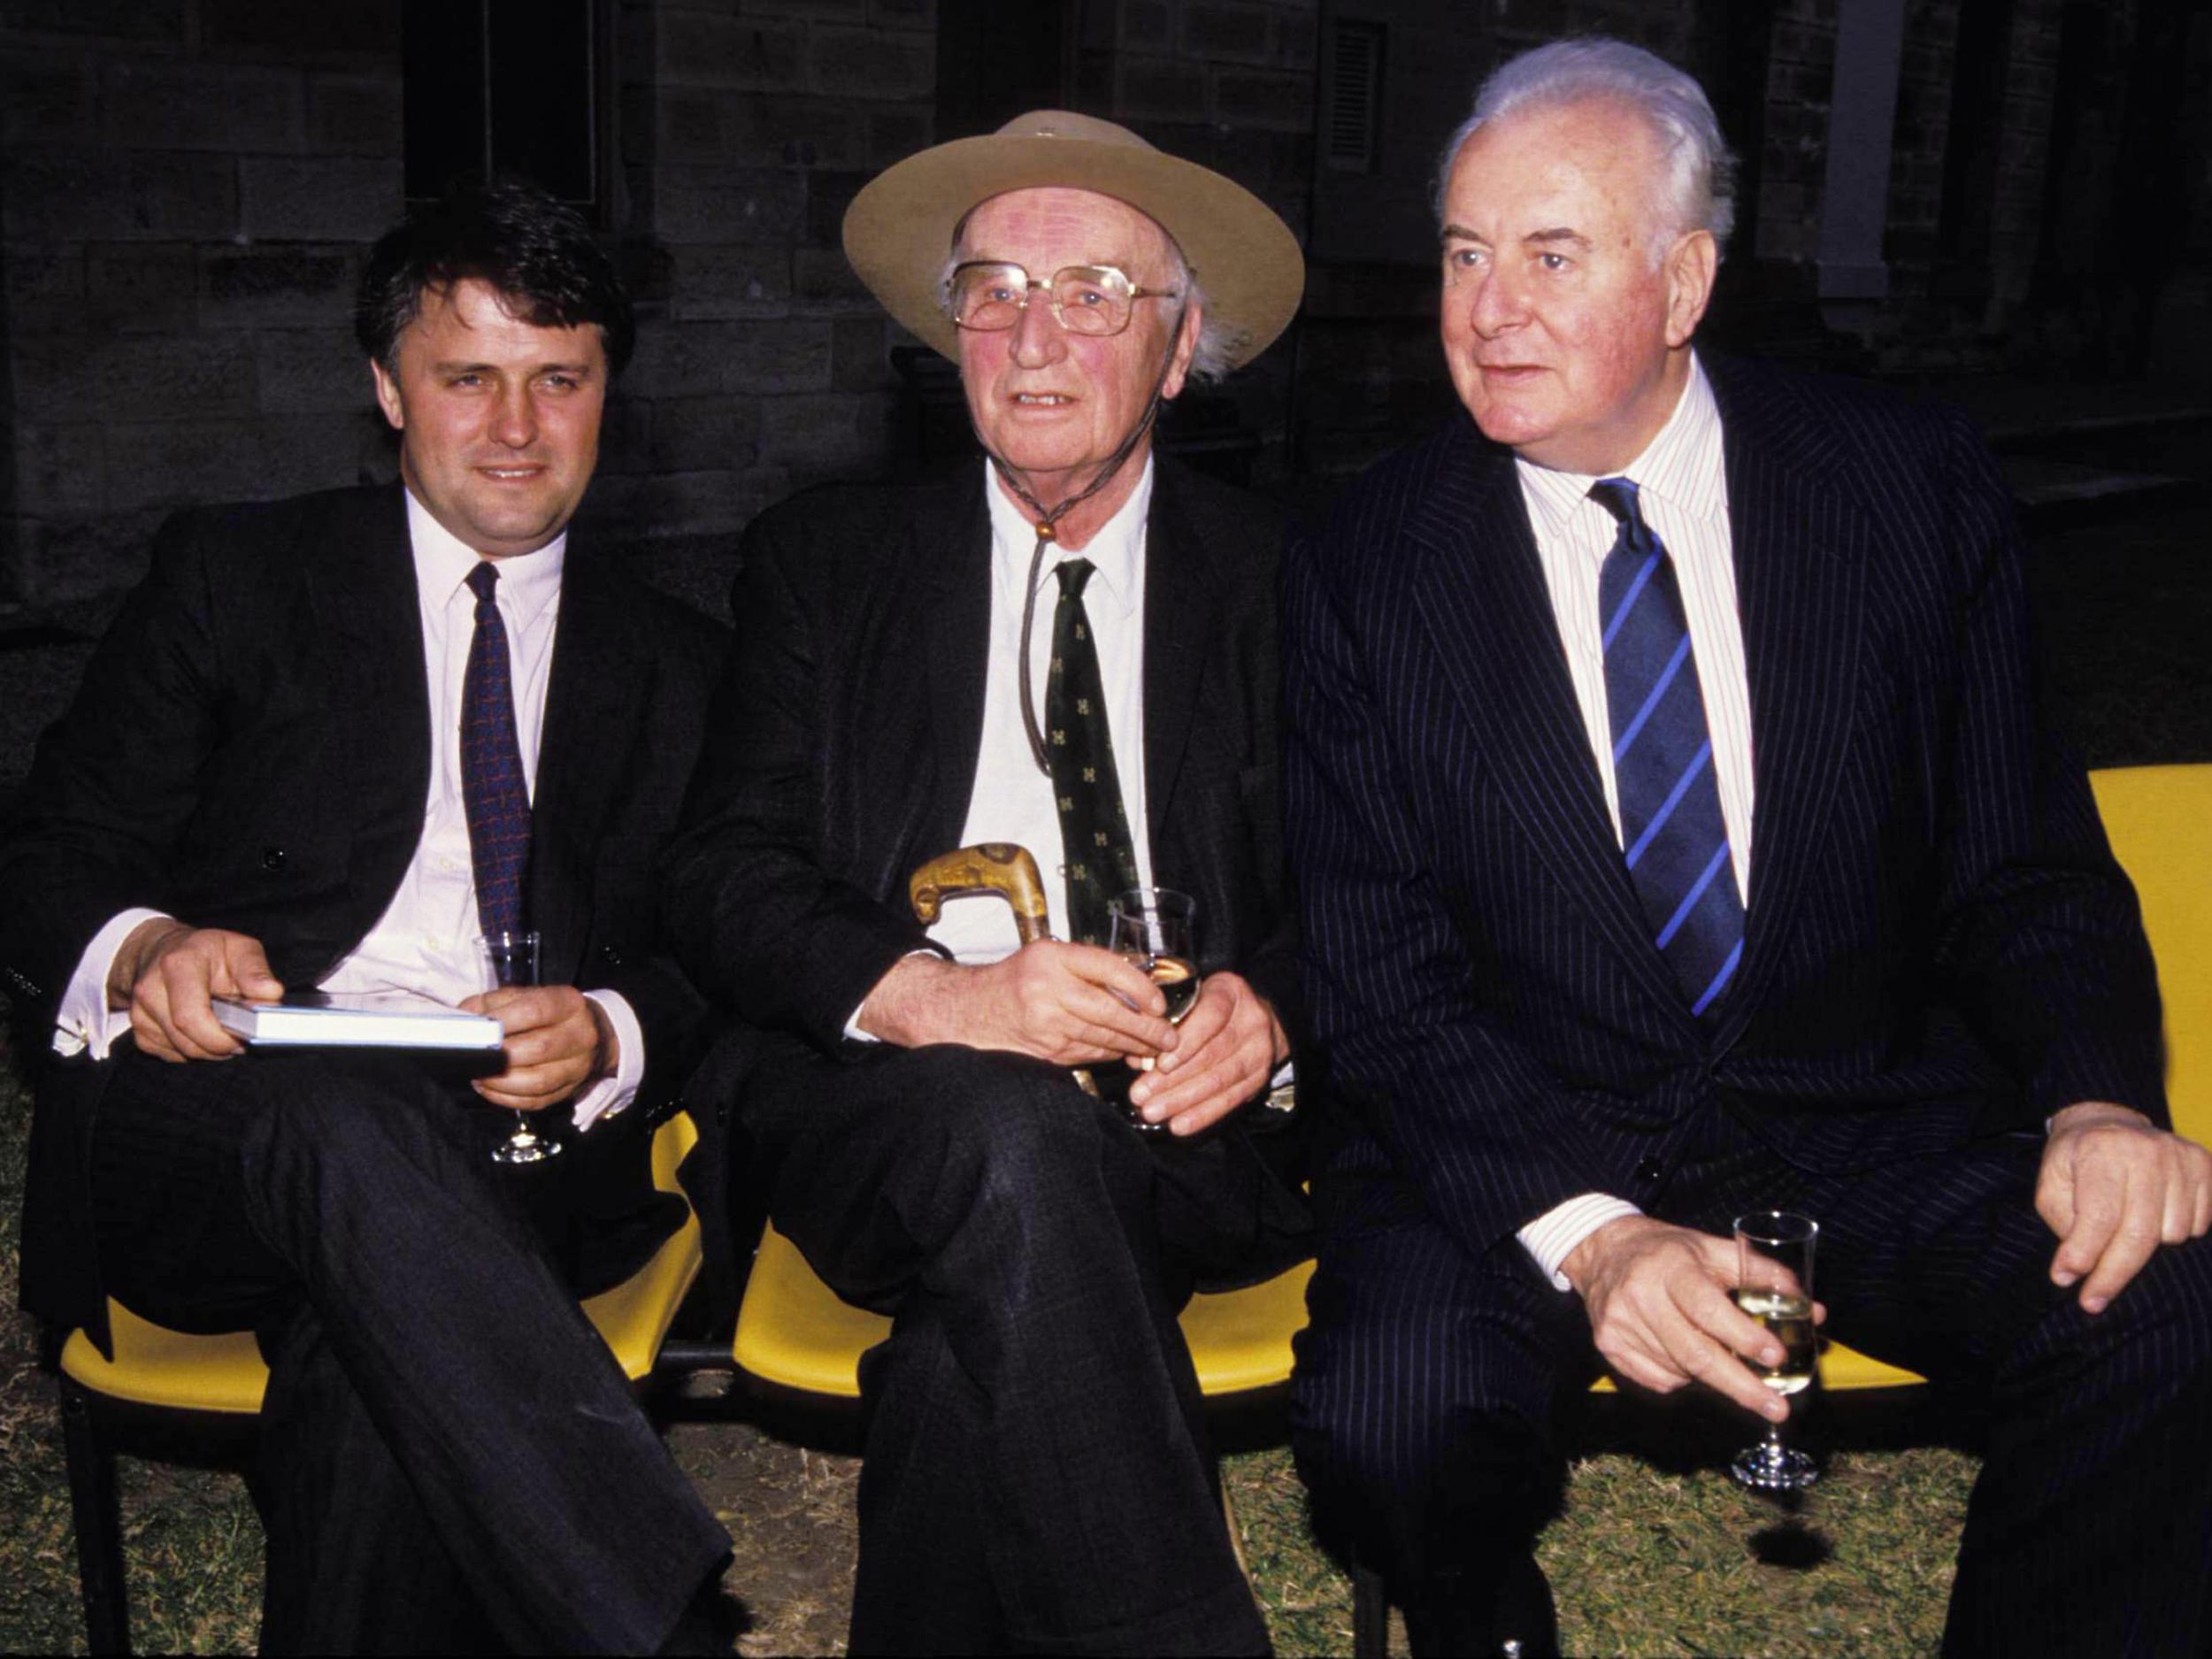 Former MI5 spy and author Peter Wright (centre) with his lawyer Malcolm Turnbull (left) and former Australian prime minister Gough Whitlam at the launch of ‘Spycatcher’ in Sydney, 1988